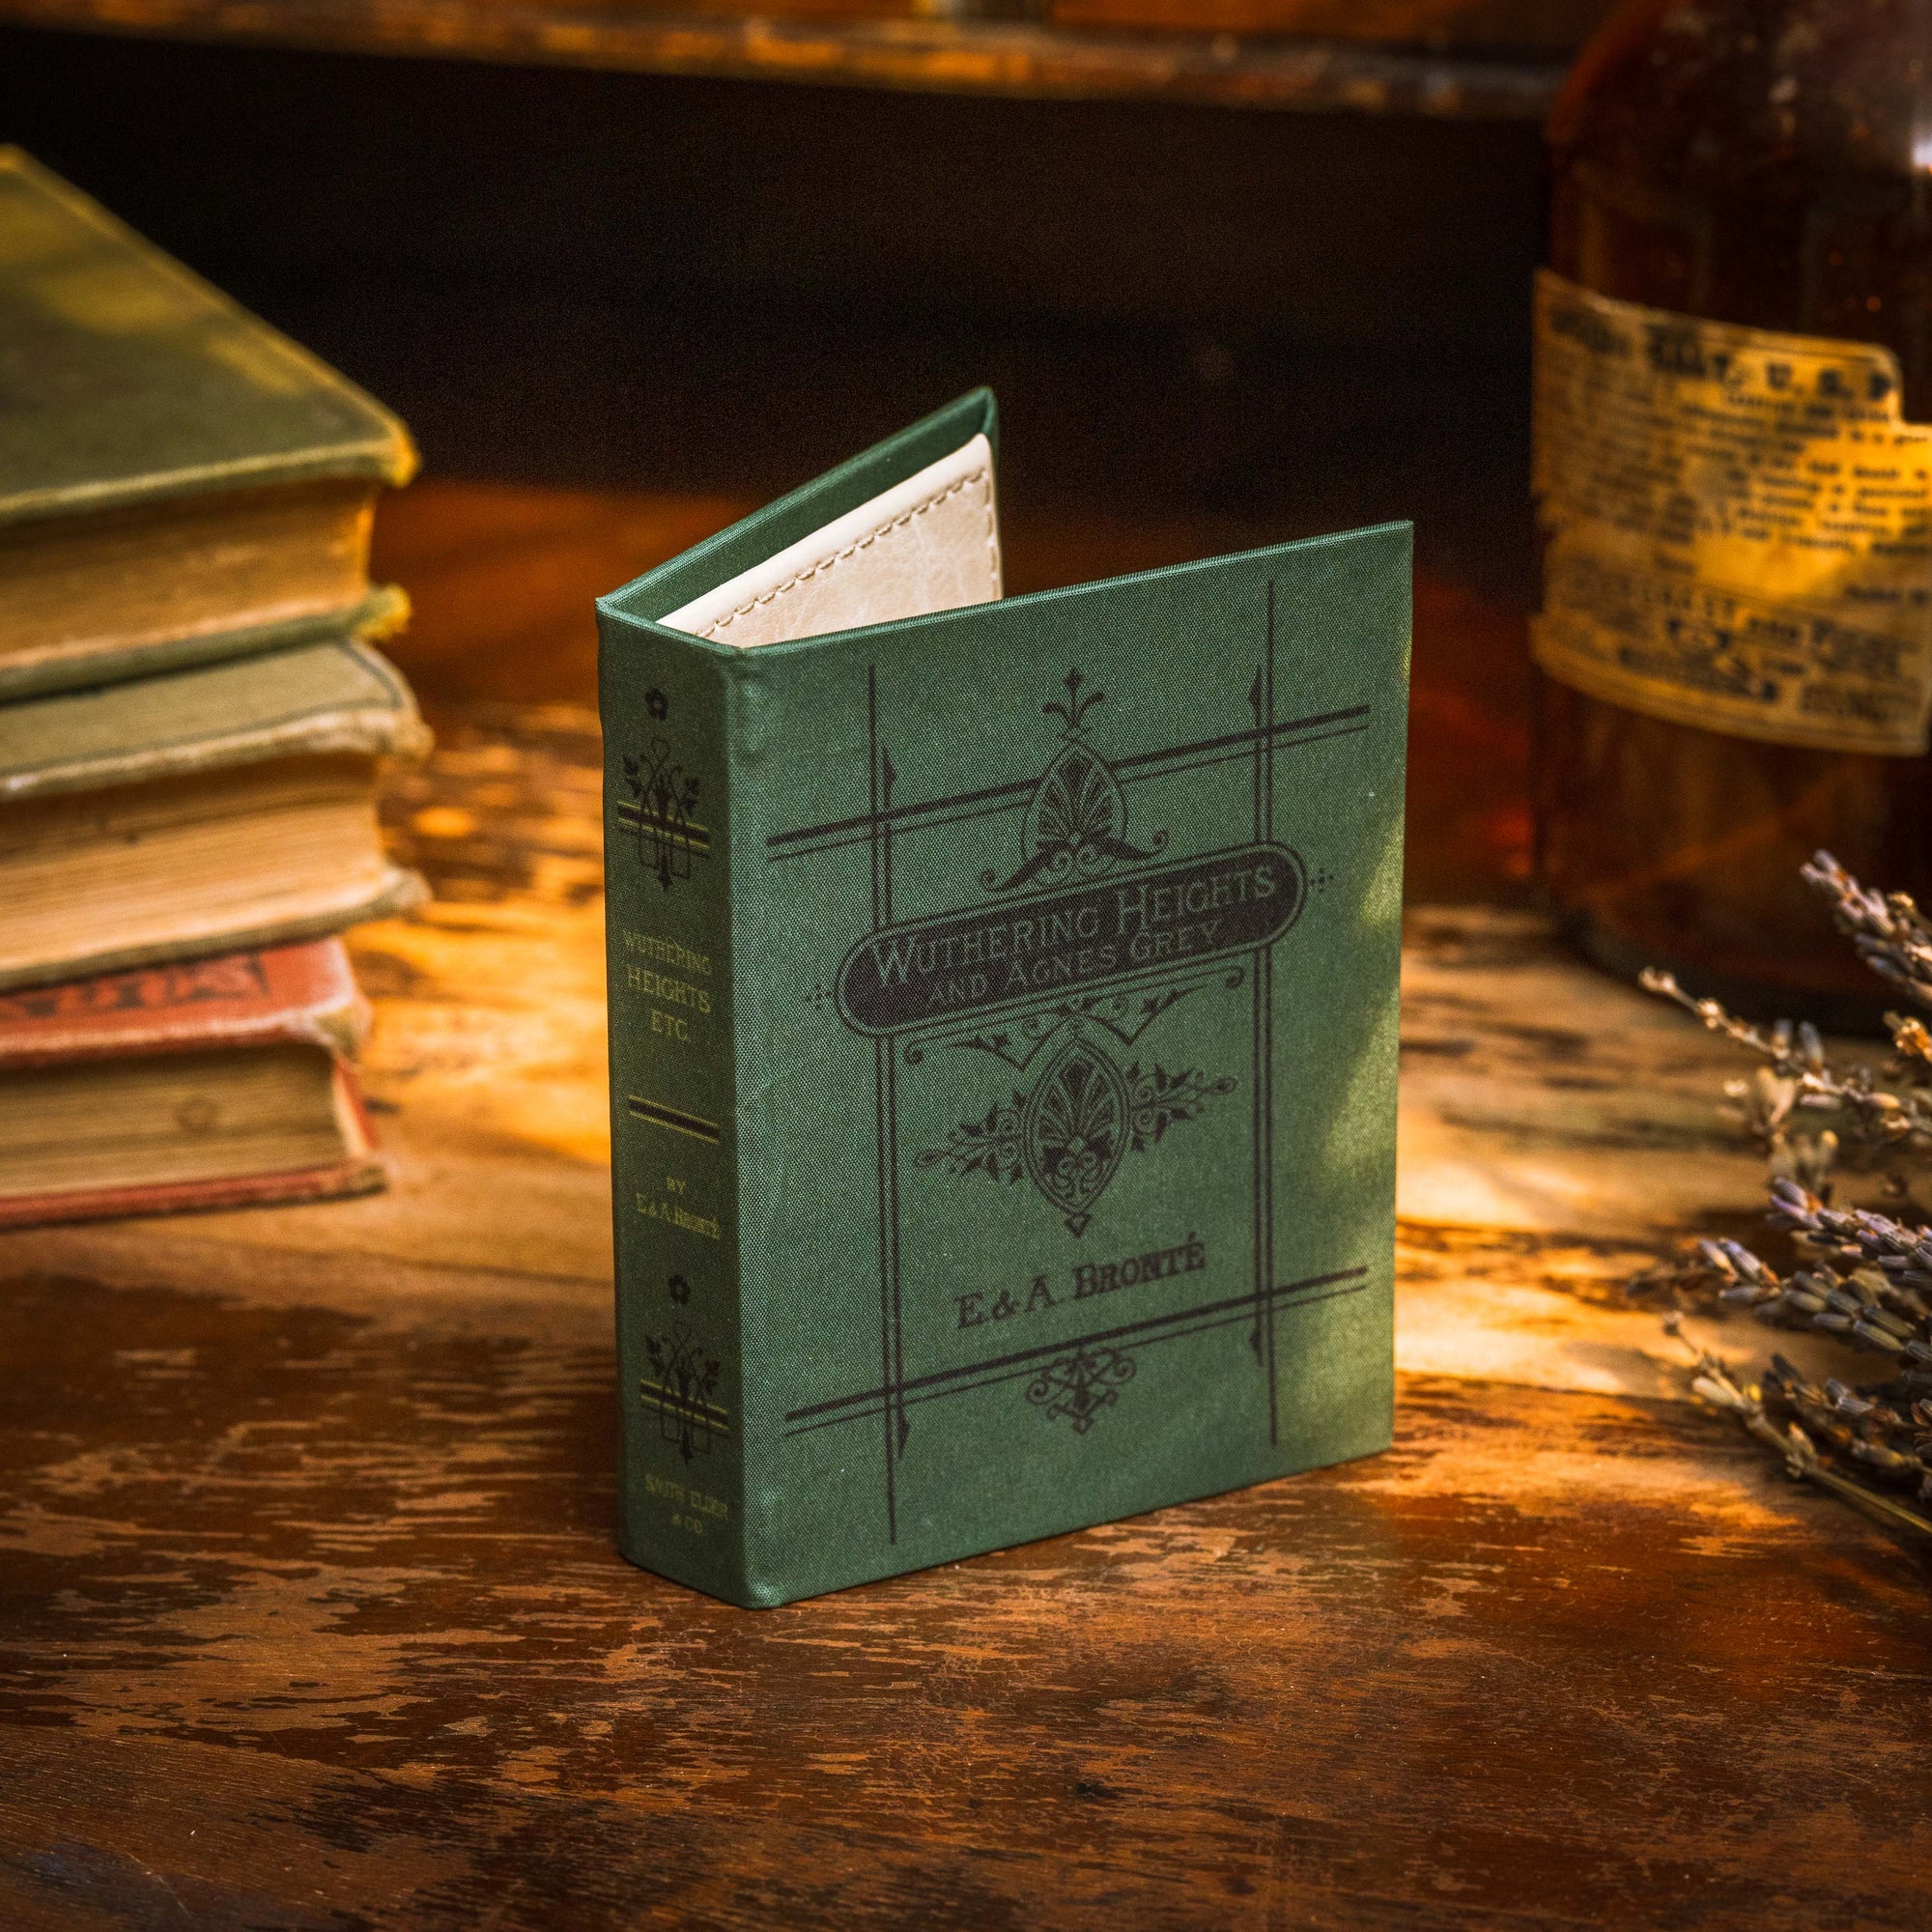 Wuthering Heights by Emily Brontë 1847  Book Wallet